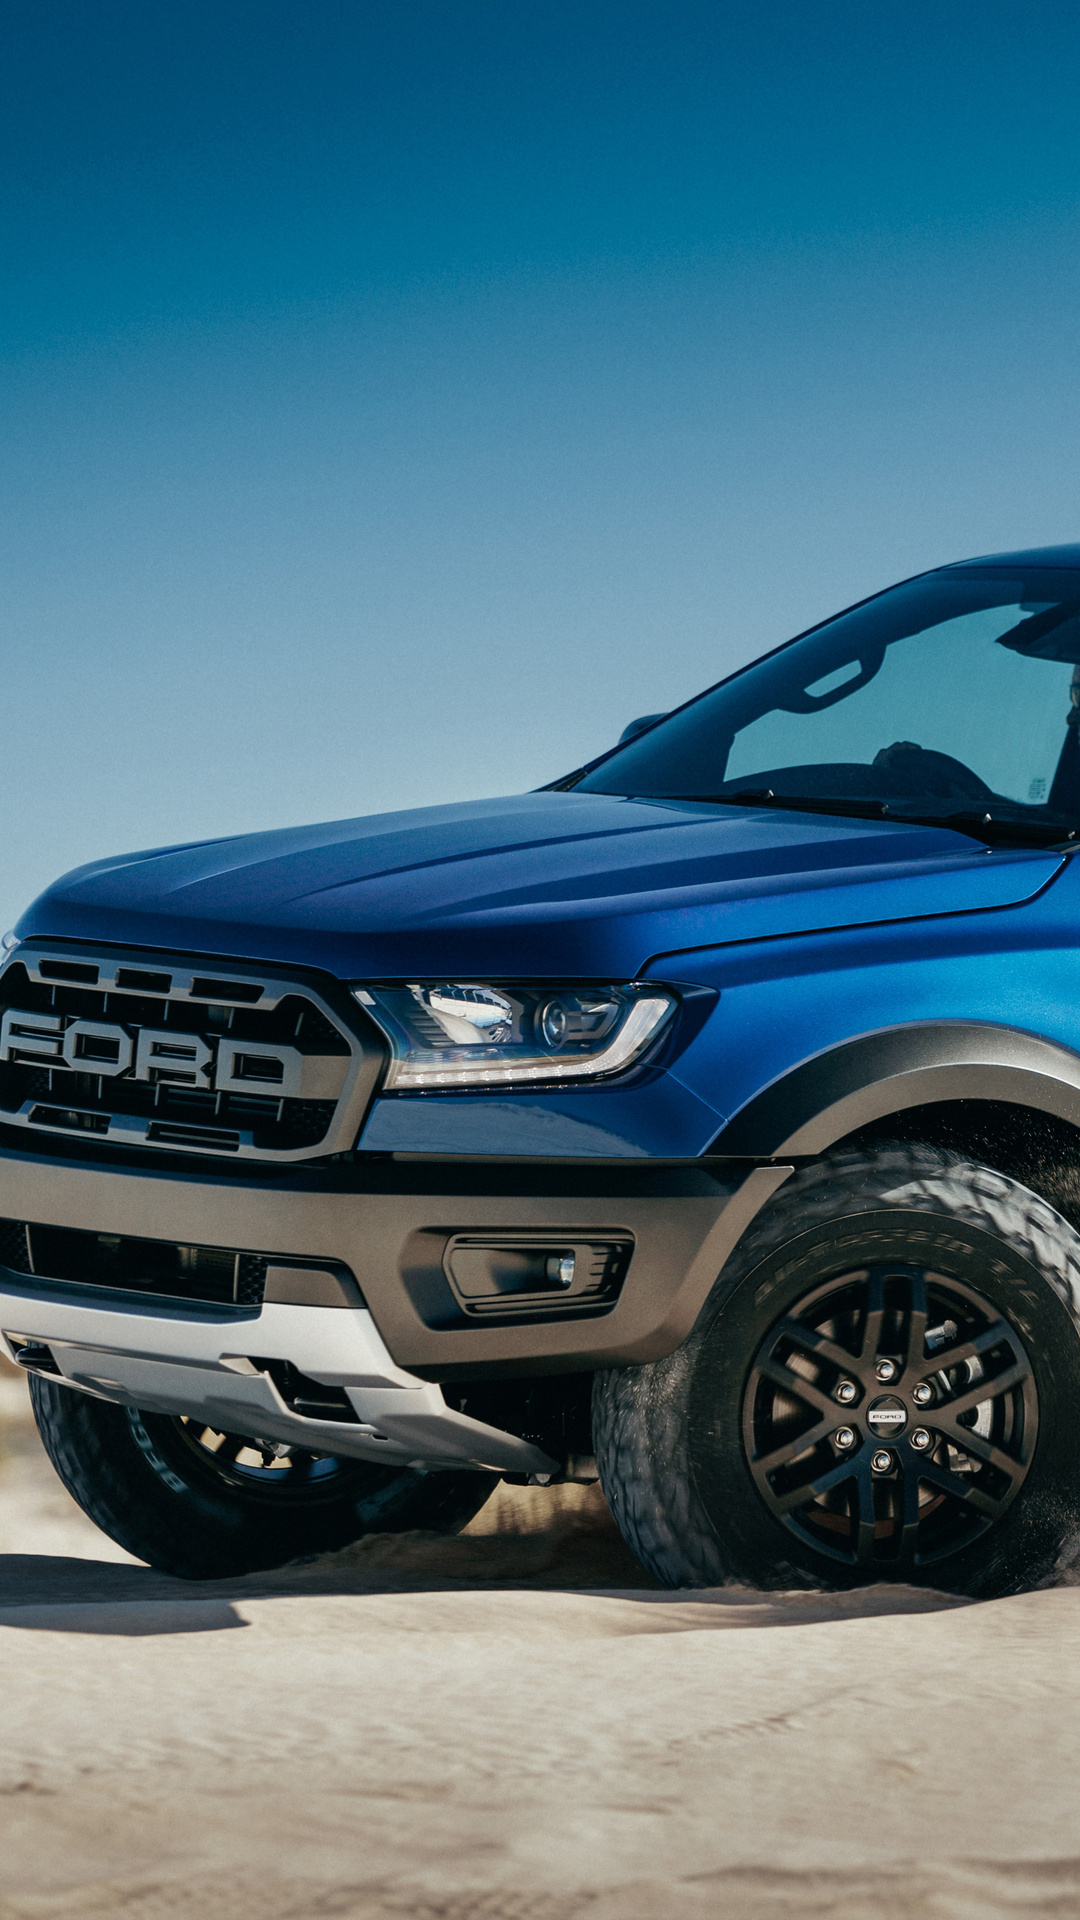 1080x1920 Ford Ranger Raptor 2019 Iphone 7,6s,6 Plus, Pixel xl ,One Plus  3,3t,5 HD 4k Wallpapers, Images, Backgrounds, Photos and Pictures